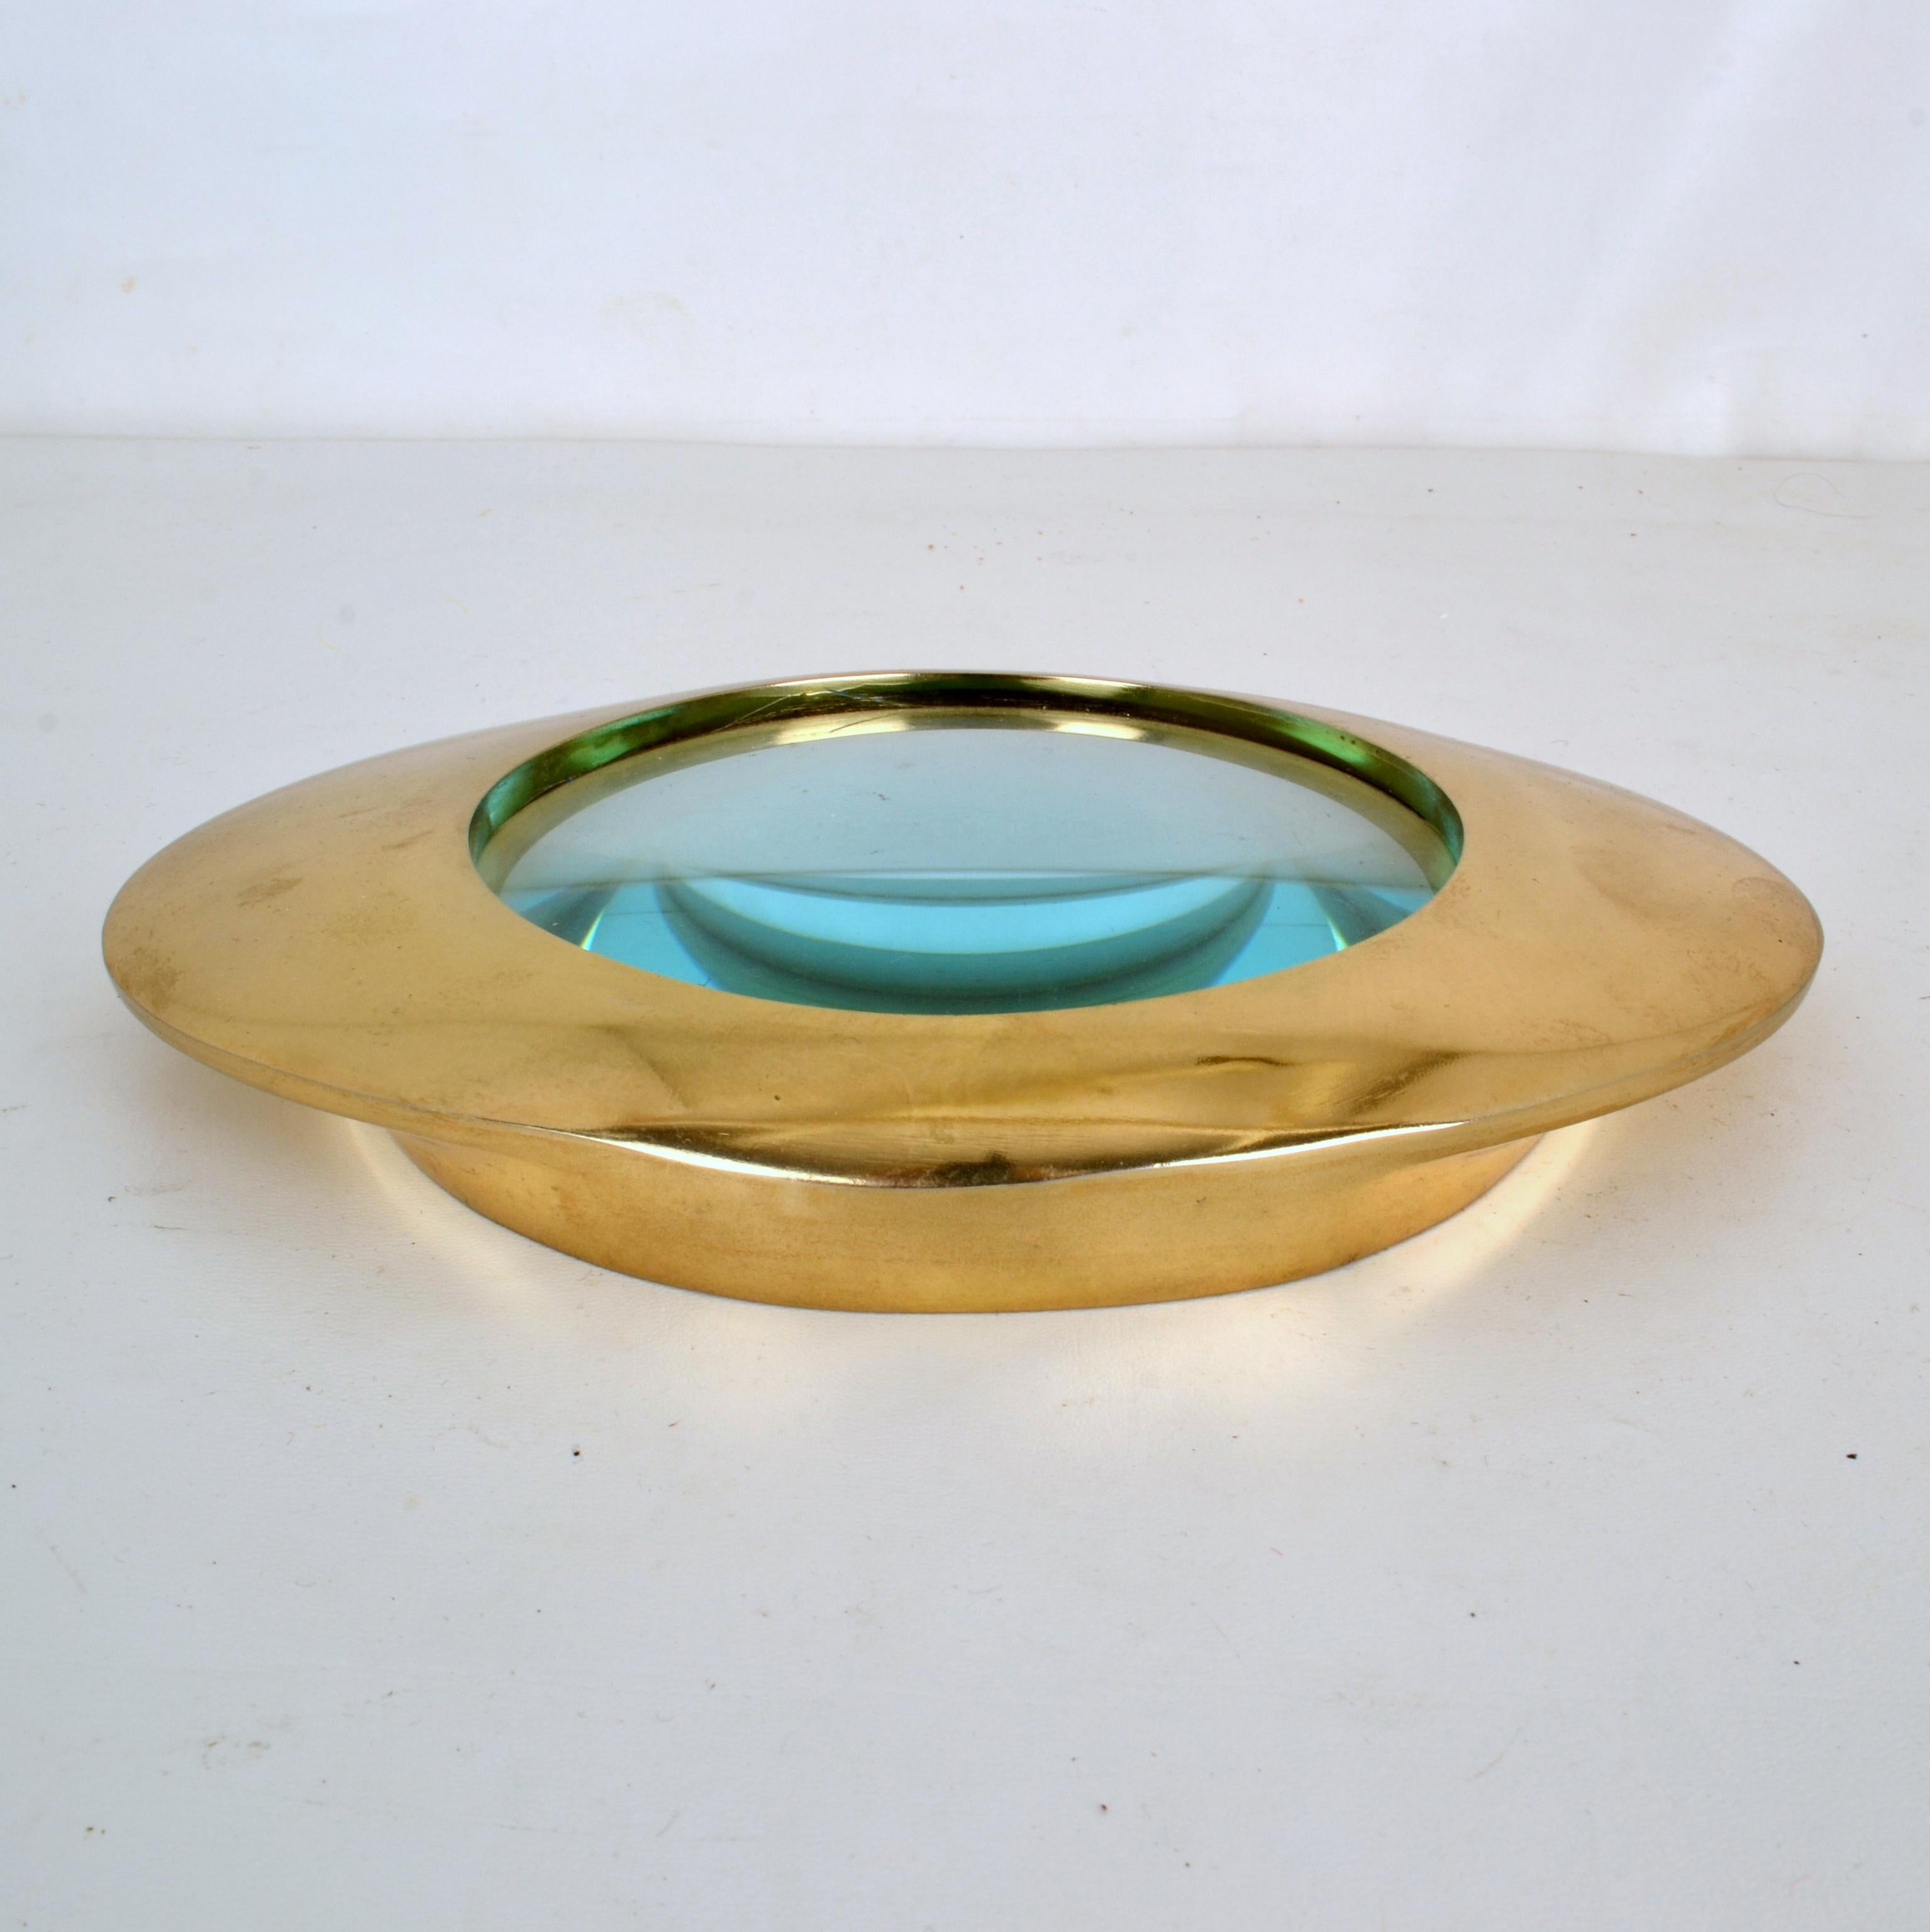 Large decorative magnifier lens with domed glass magnification, encased in eye shape brass cast frame. Very decorative piece that can also be displayed a s paper weight of desk accessorize. Inspired by Library magnifier lenses that were often used